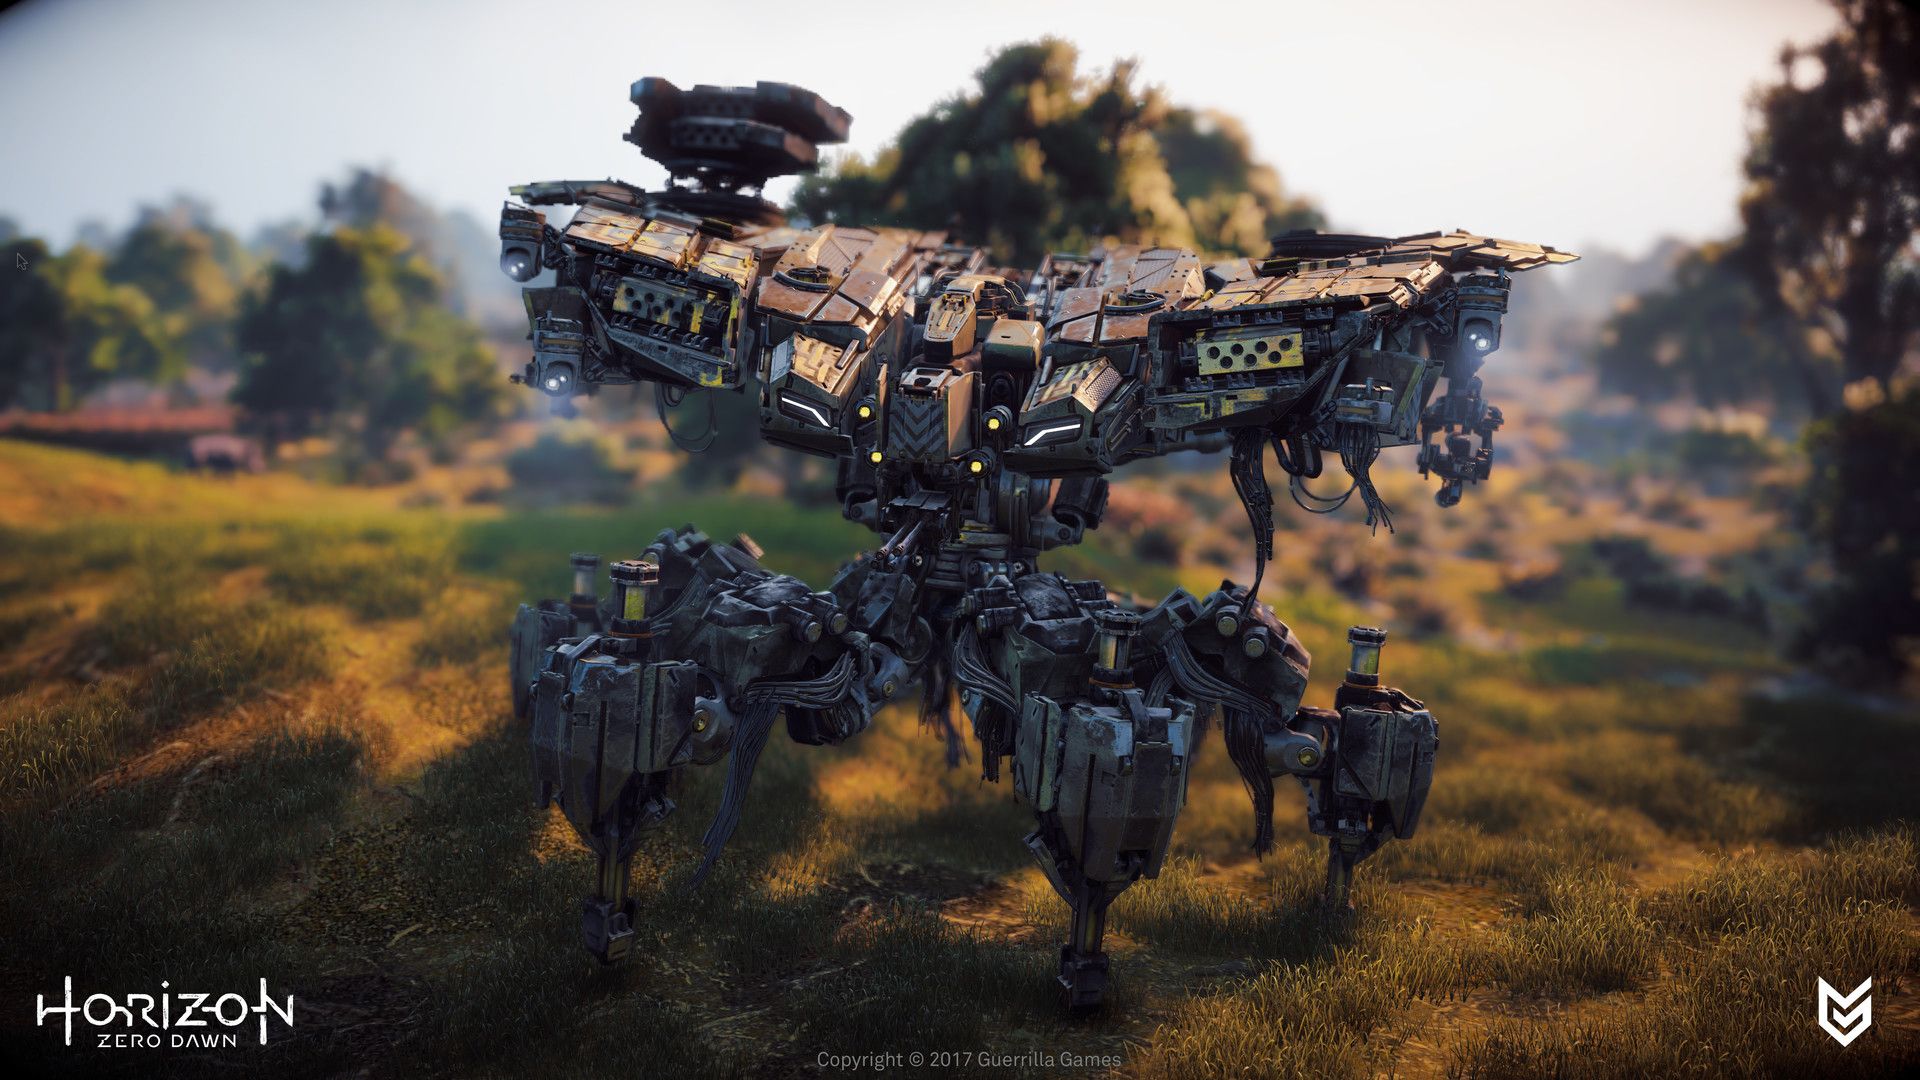 Deathbringers Are The Most Non Animal Looking Machines In Horizon Zero Dawn, Possessing A Monstrous Bo. Horizon Zero Dawn, Horizon Zero Dawn Robot, Robot Animal